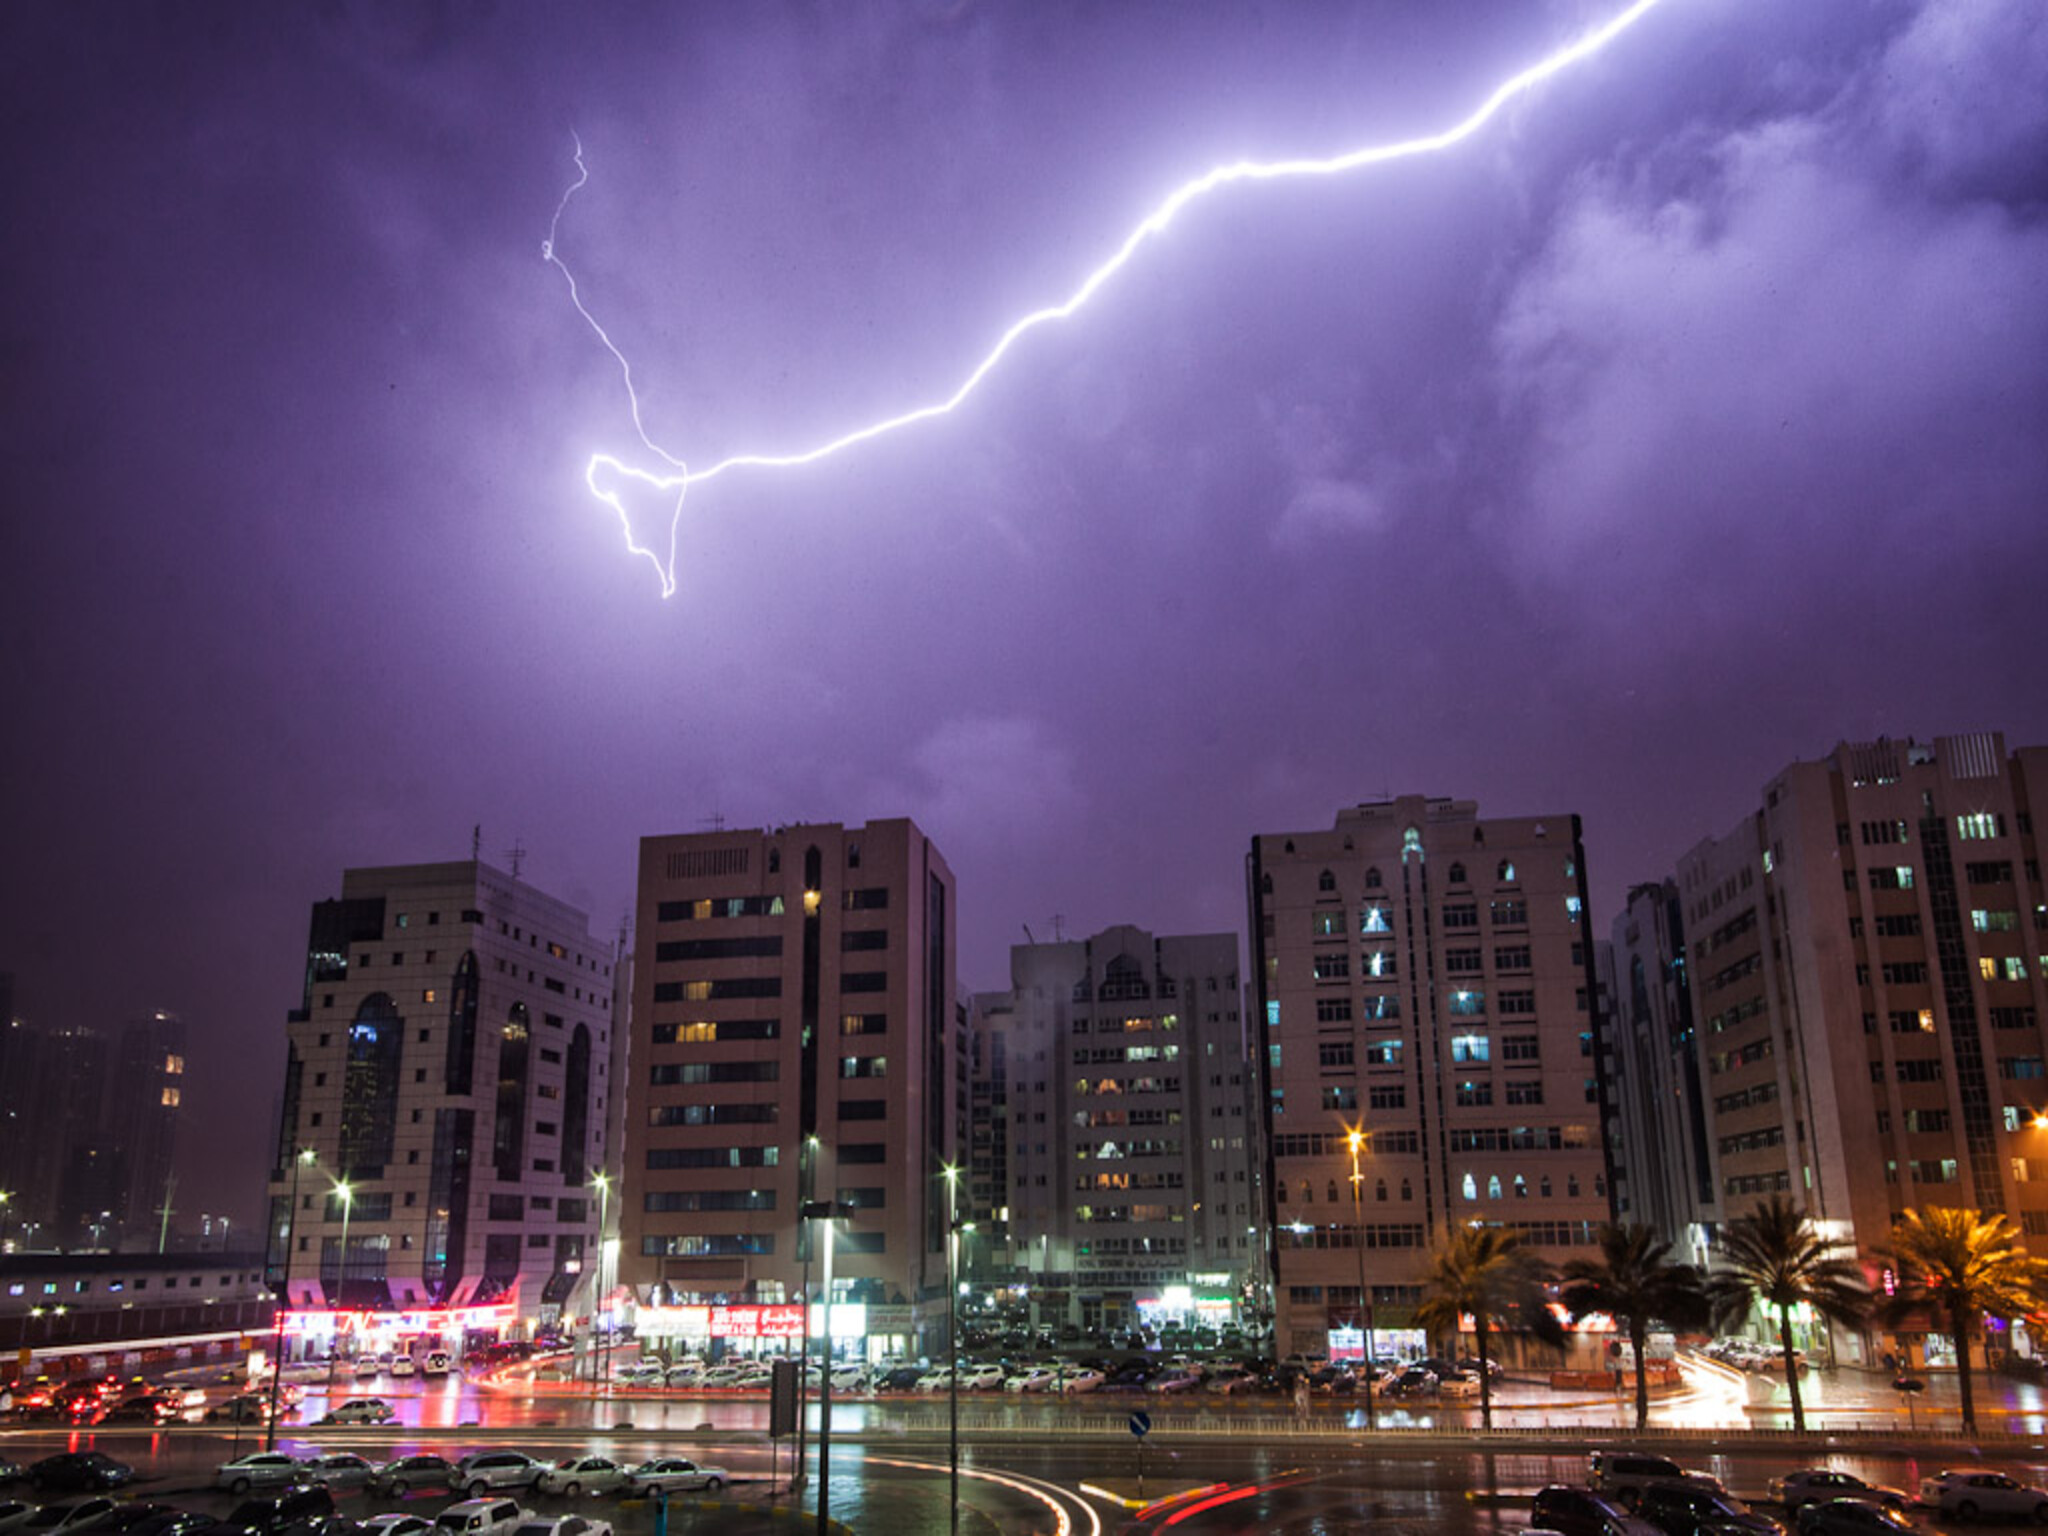 The authorities issued an important warning to residents in the UAE due to the thunderstorm